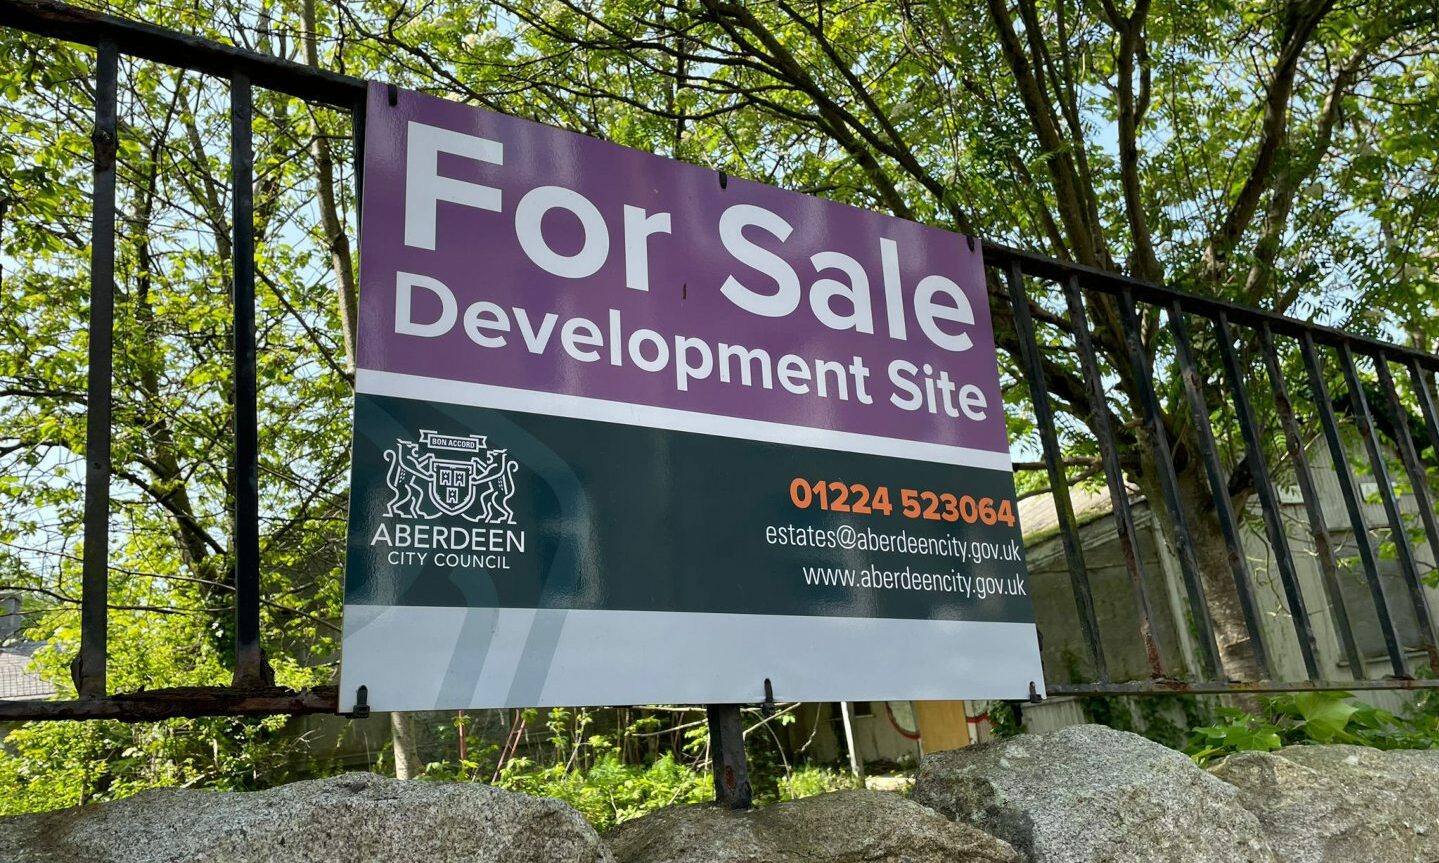 'For Sale' sign at the site near Aberdeen University.